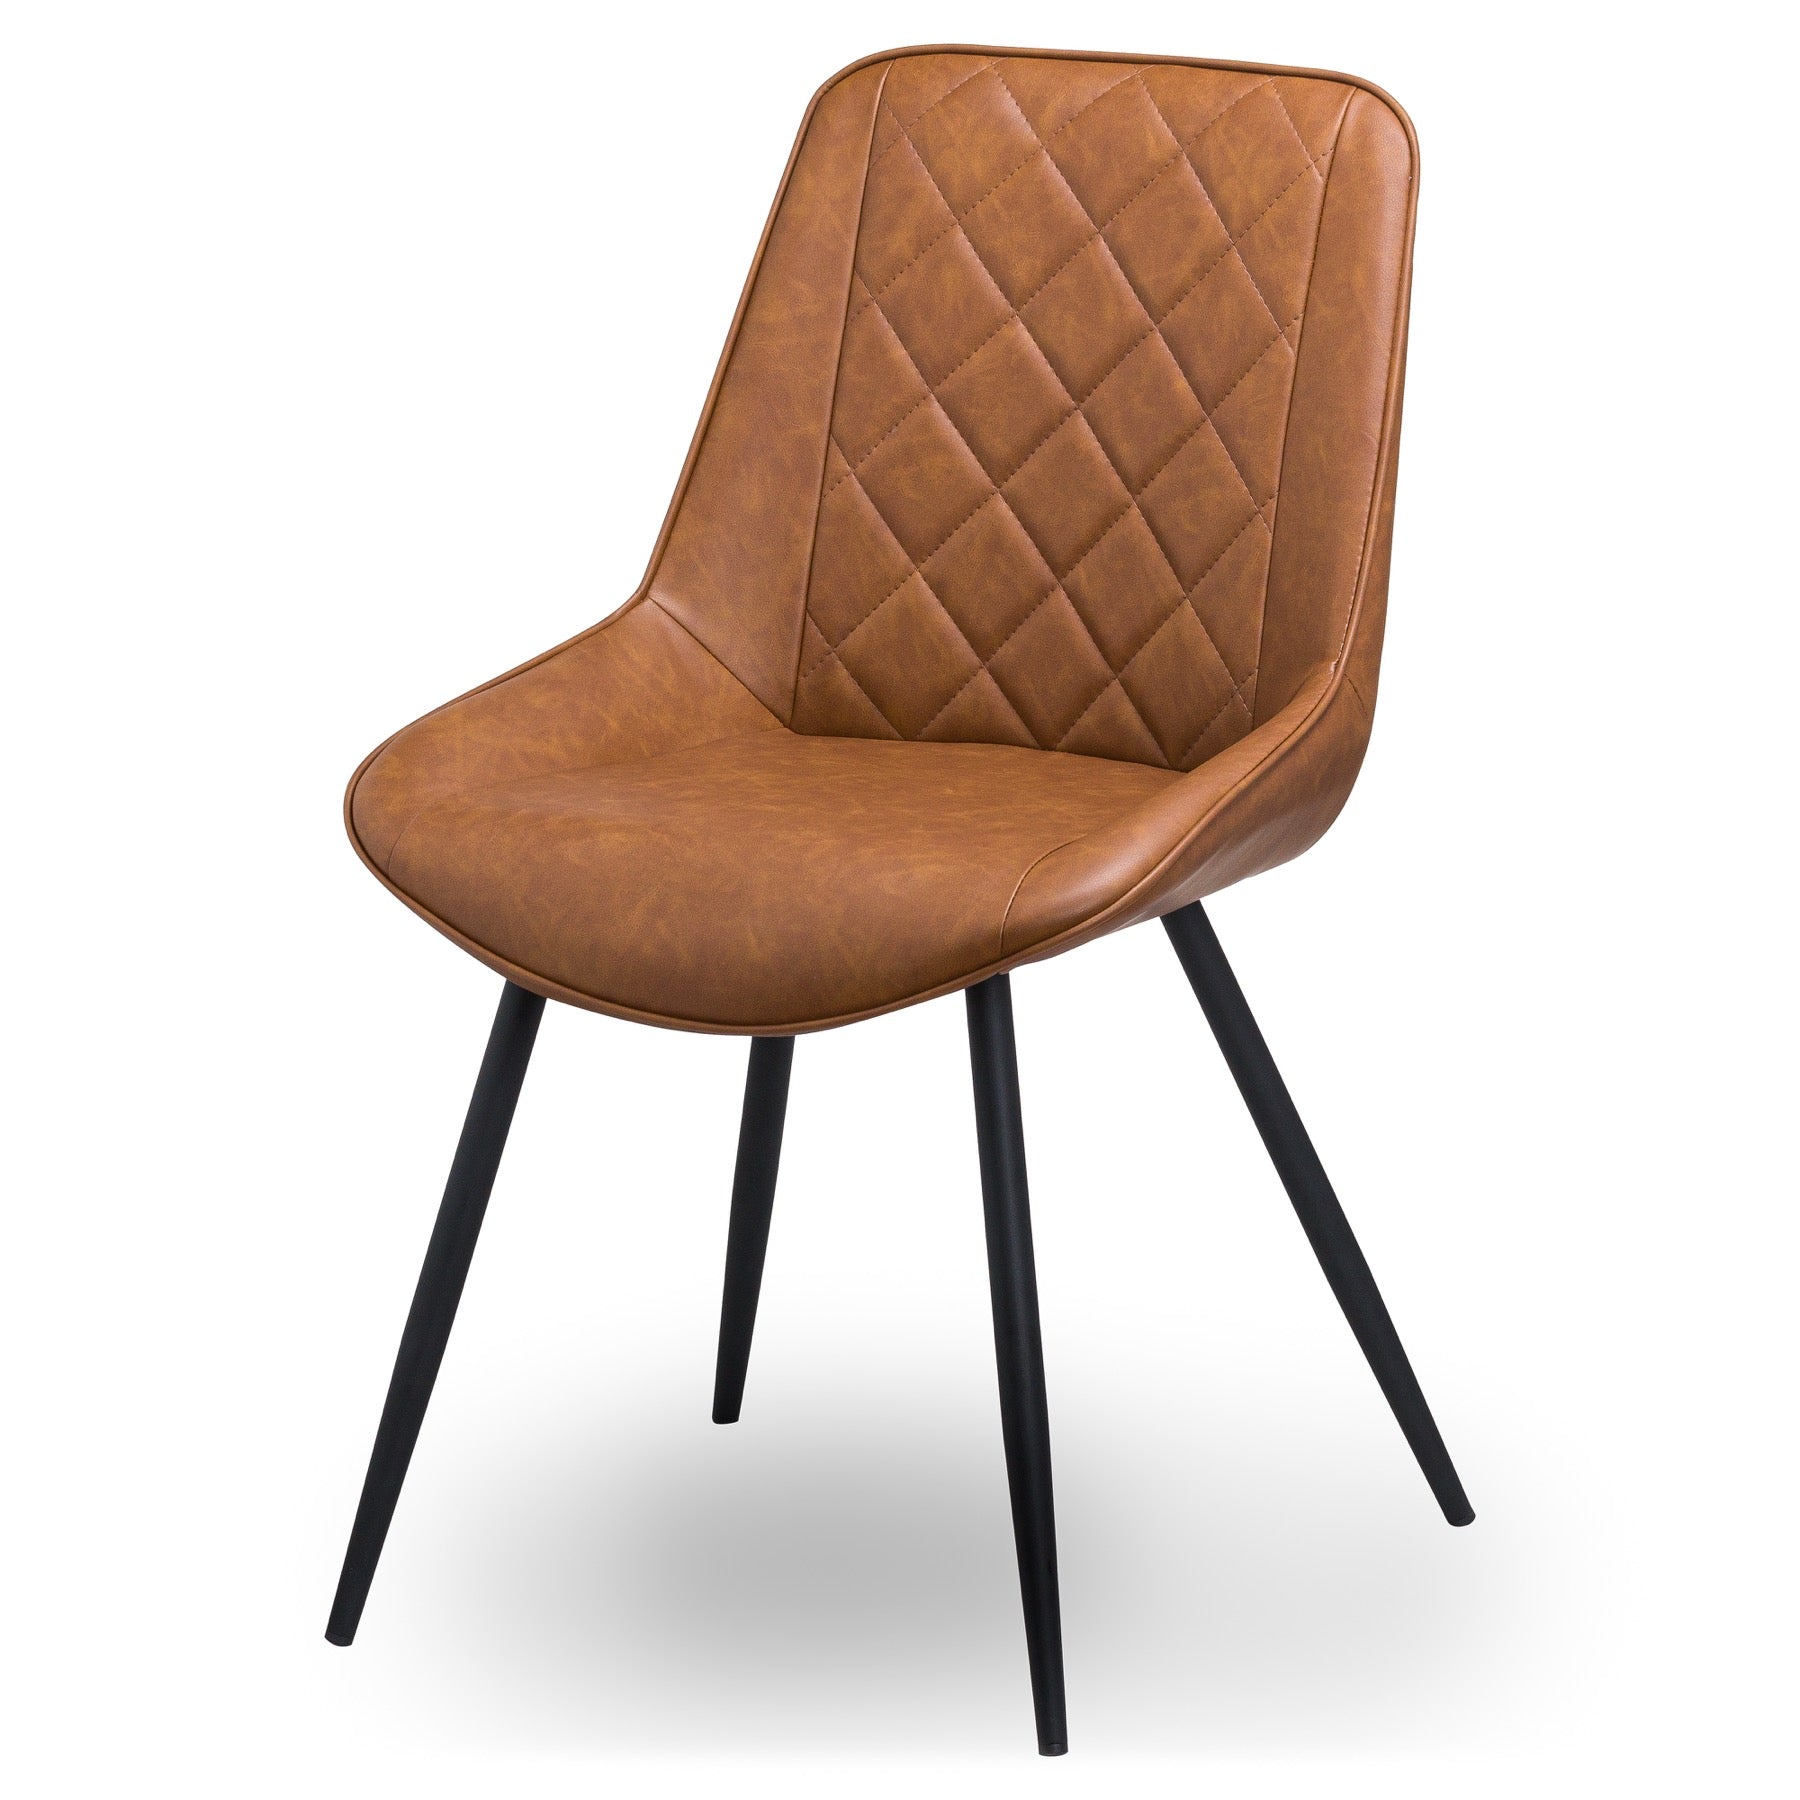 Image of Oslo Tan Dining Chair